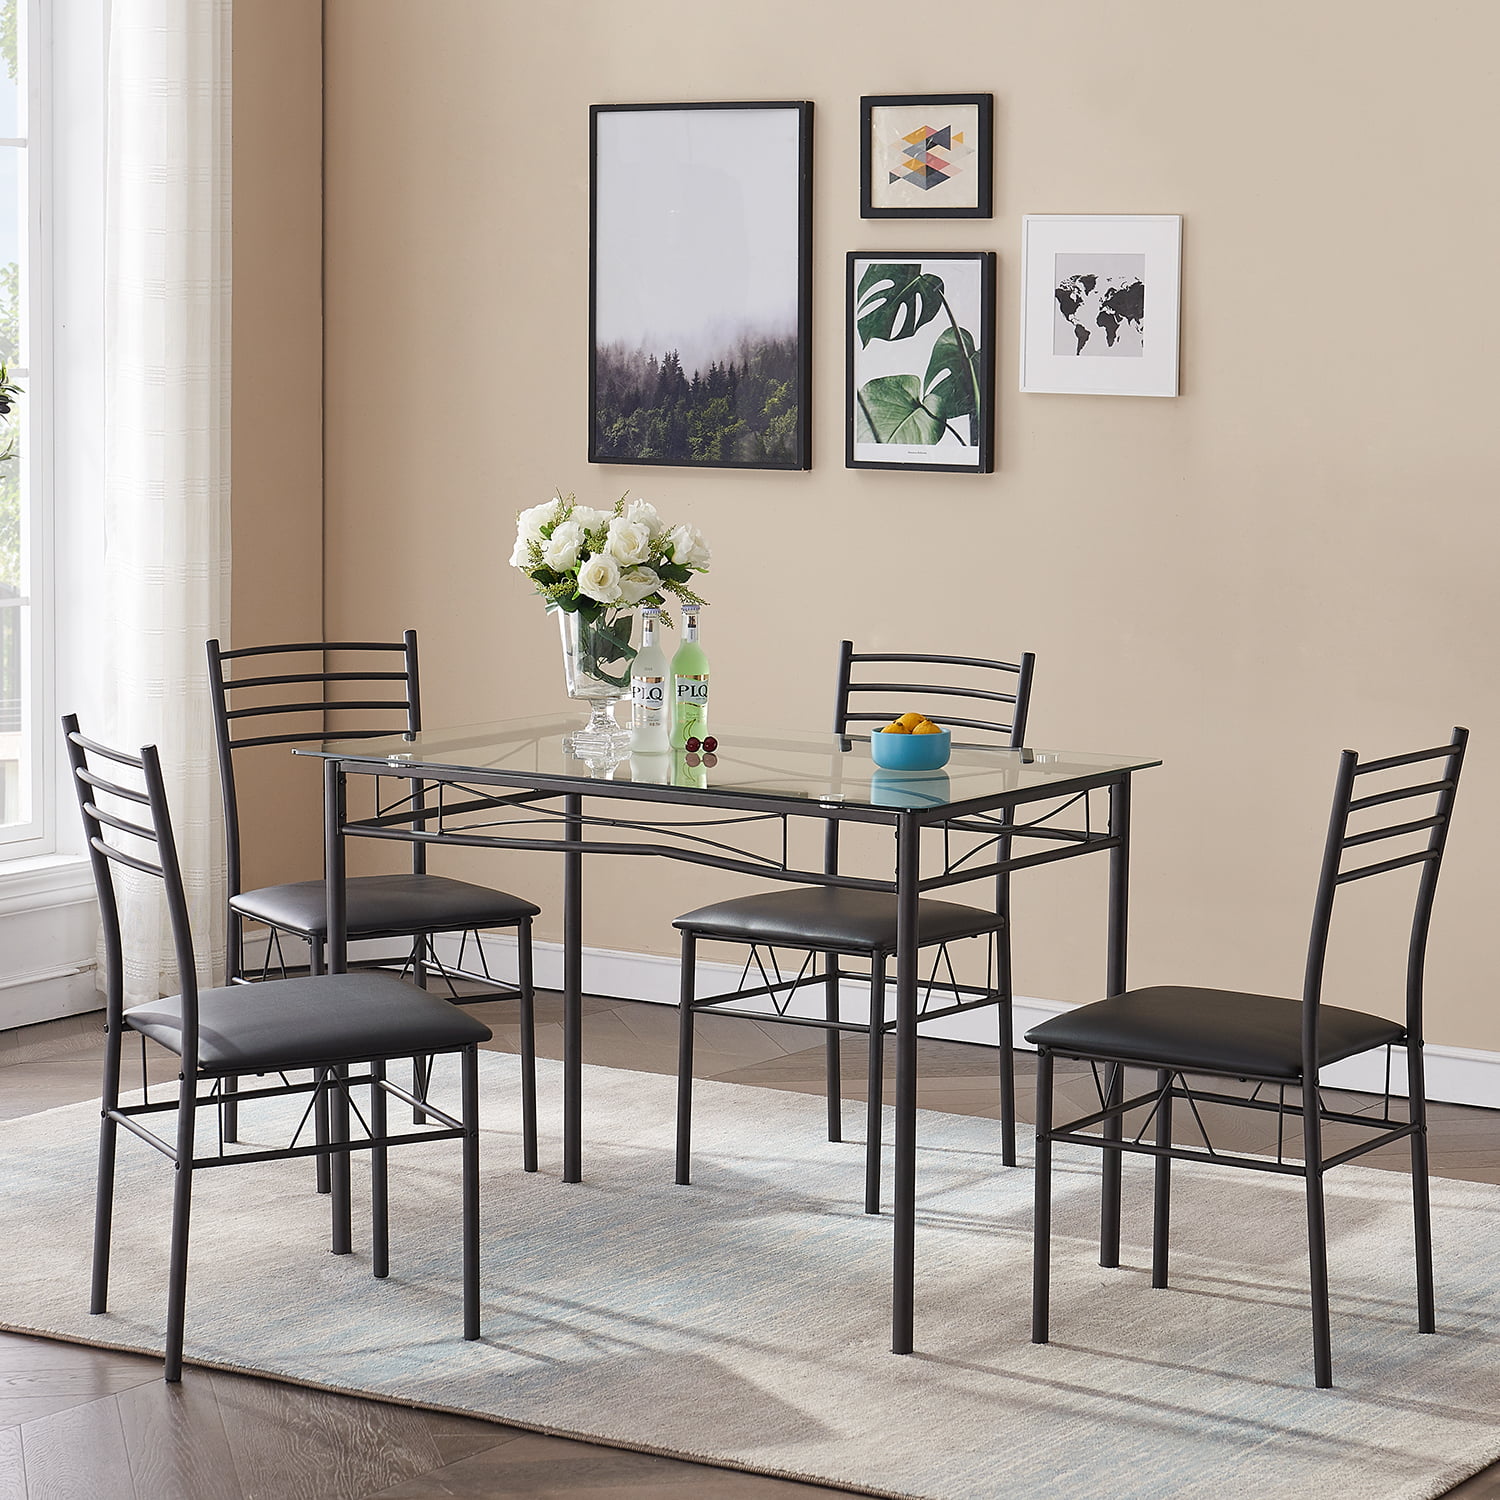 VECELO 5 Piece Dining Table Set Glass Top Rectangle Dine table And 4 ...